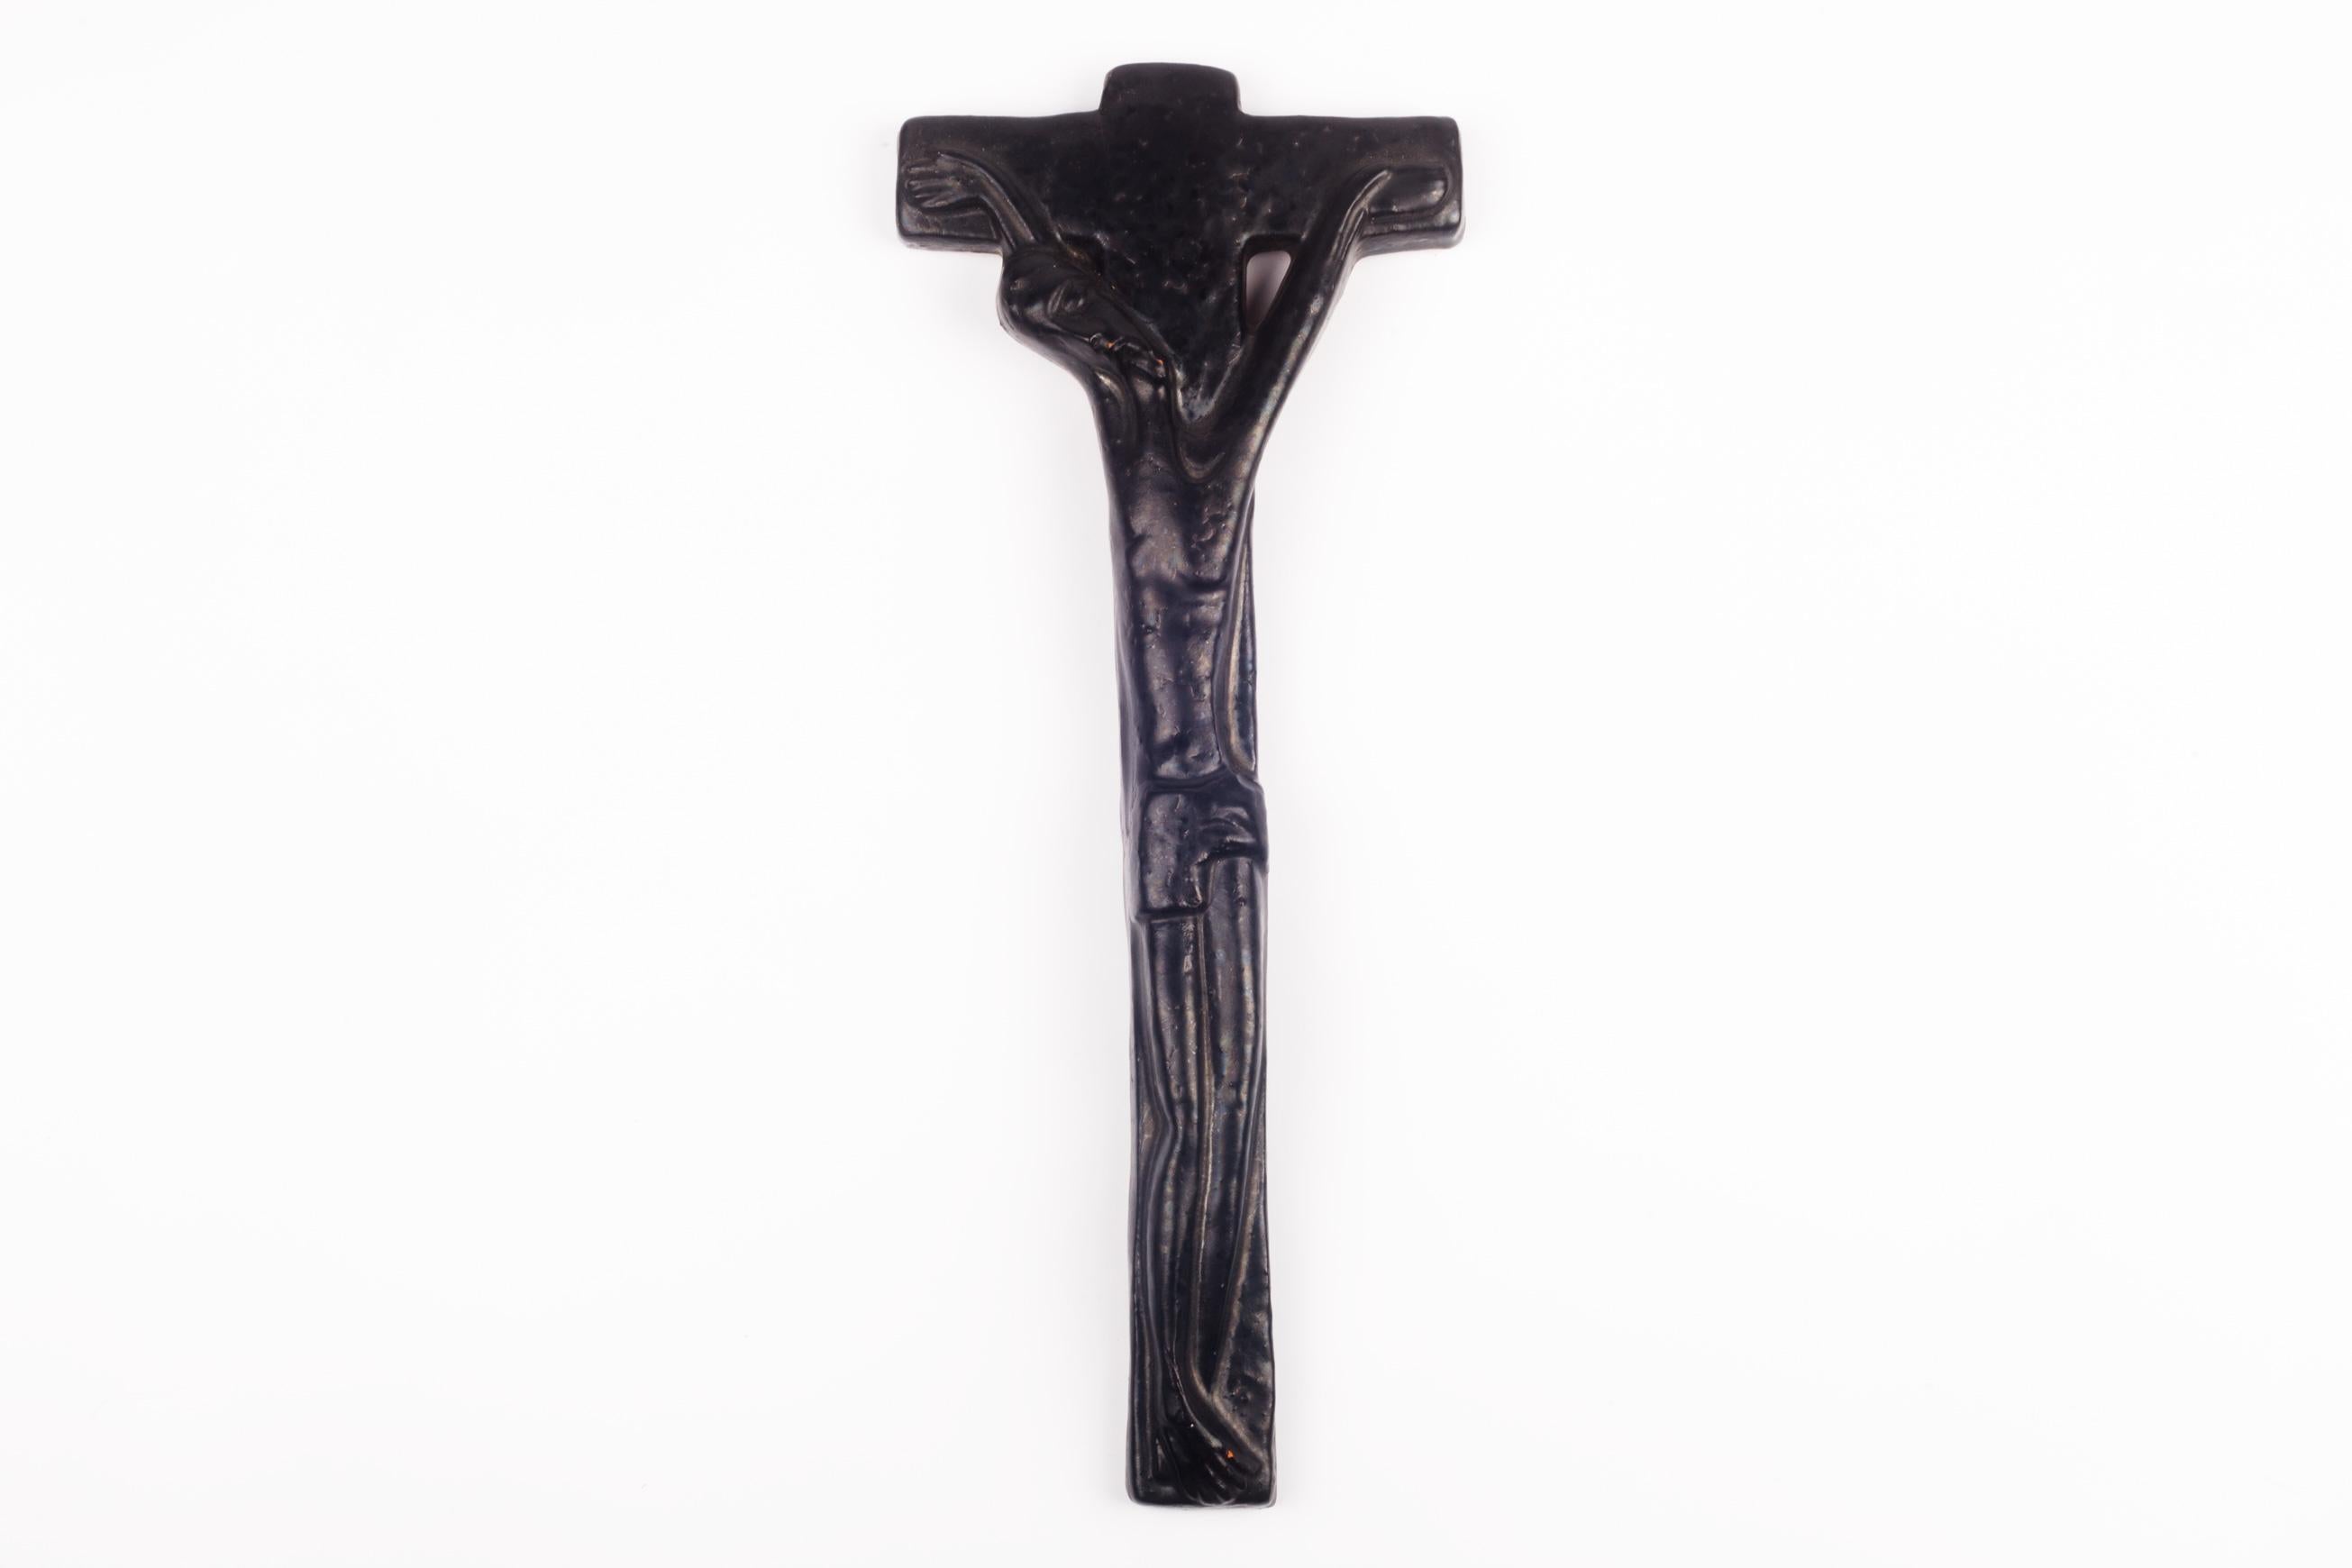 European crucifix in black glazed ceramic. Modernist and brutalist Christ figure with charismatic lines and overly bent neck. The visionary all-black piece is highlighted solely by dark reflections. A one-of-a-kind, handcrafted piece that is part of